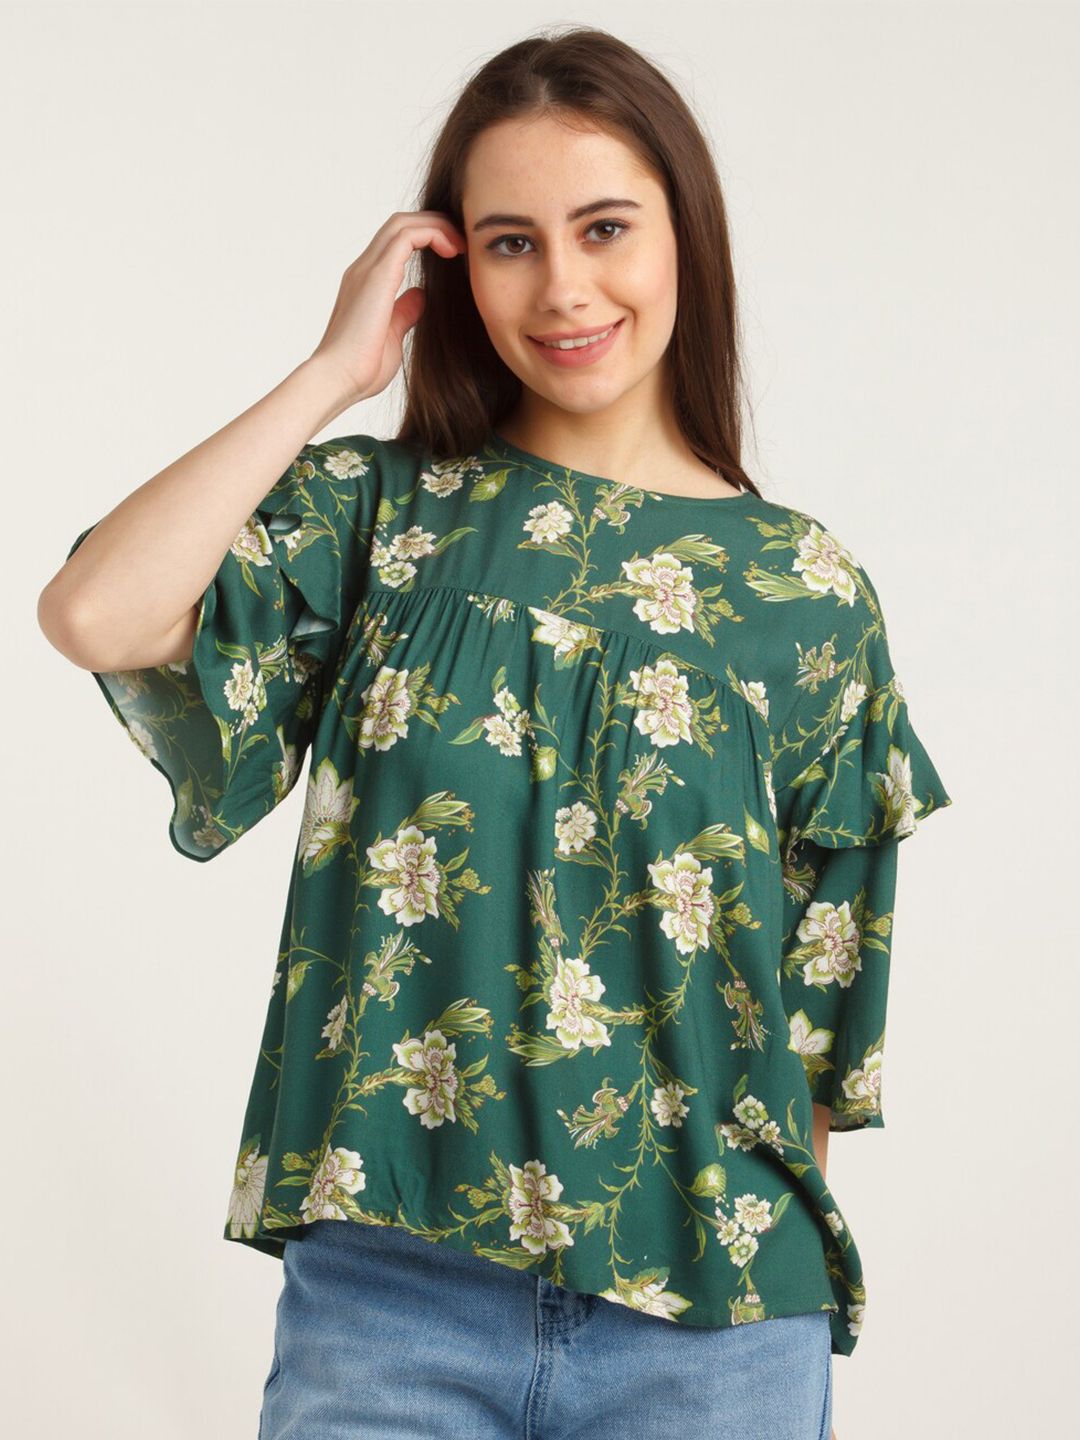 Zink London Green Floral Print Top Price in India